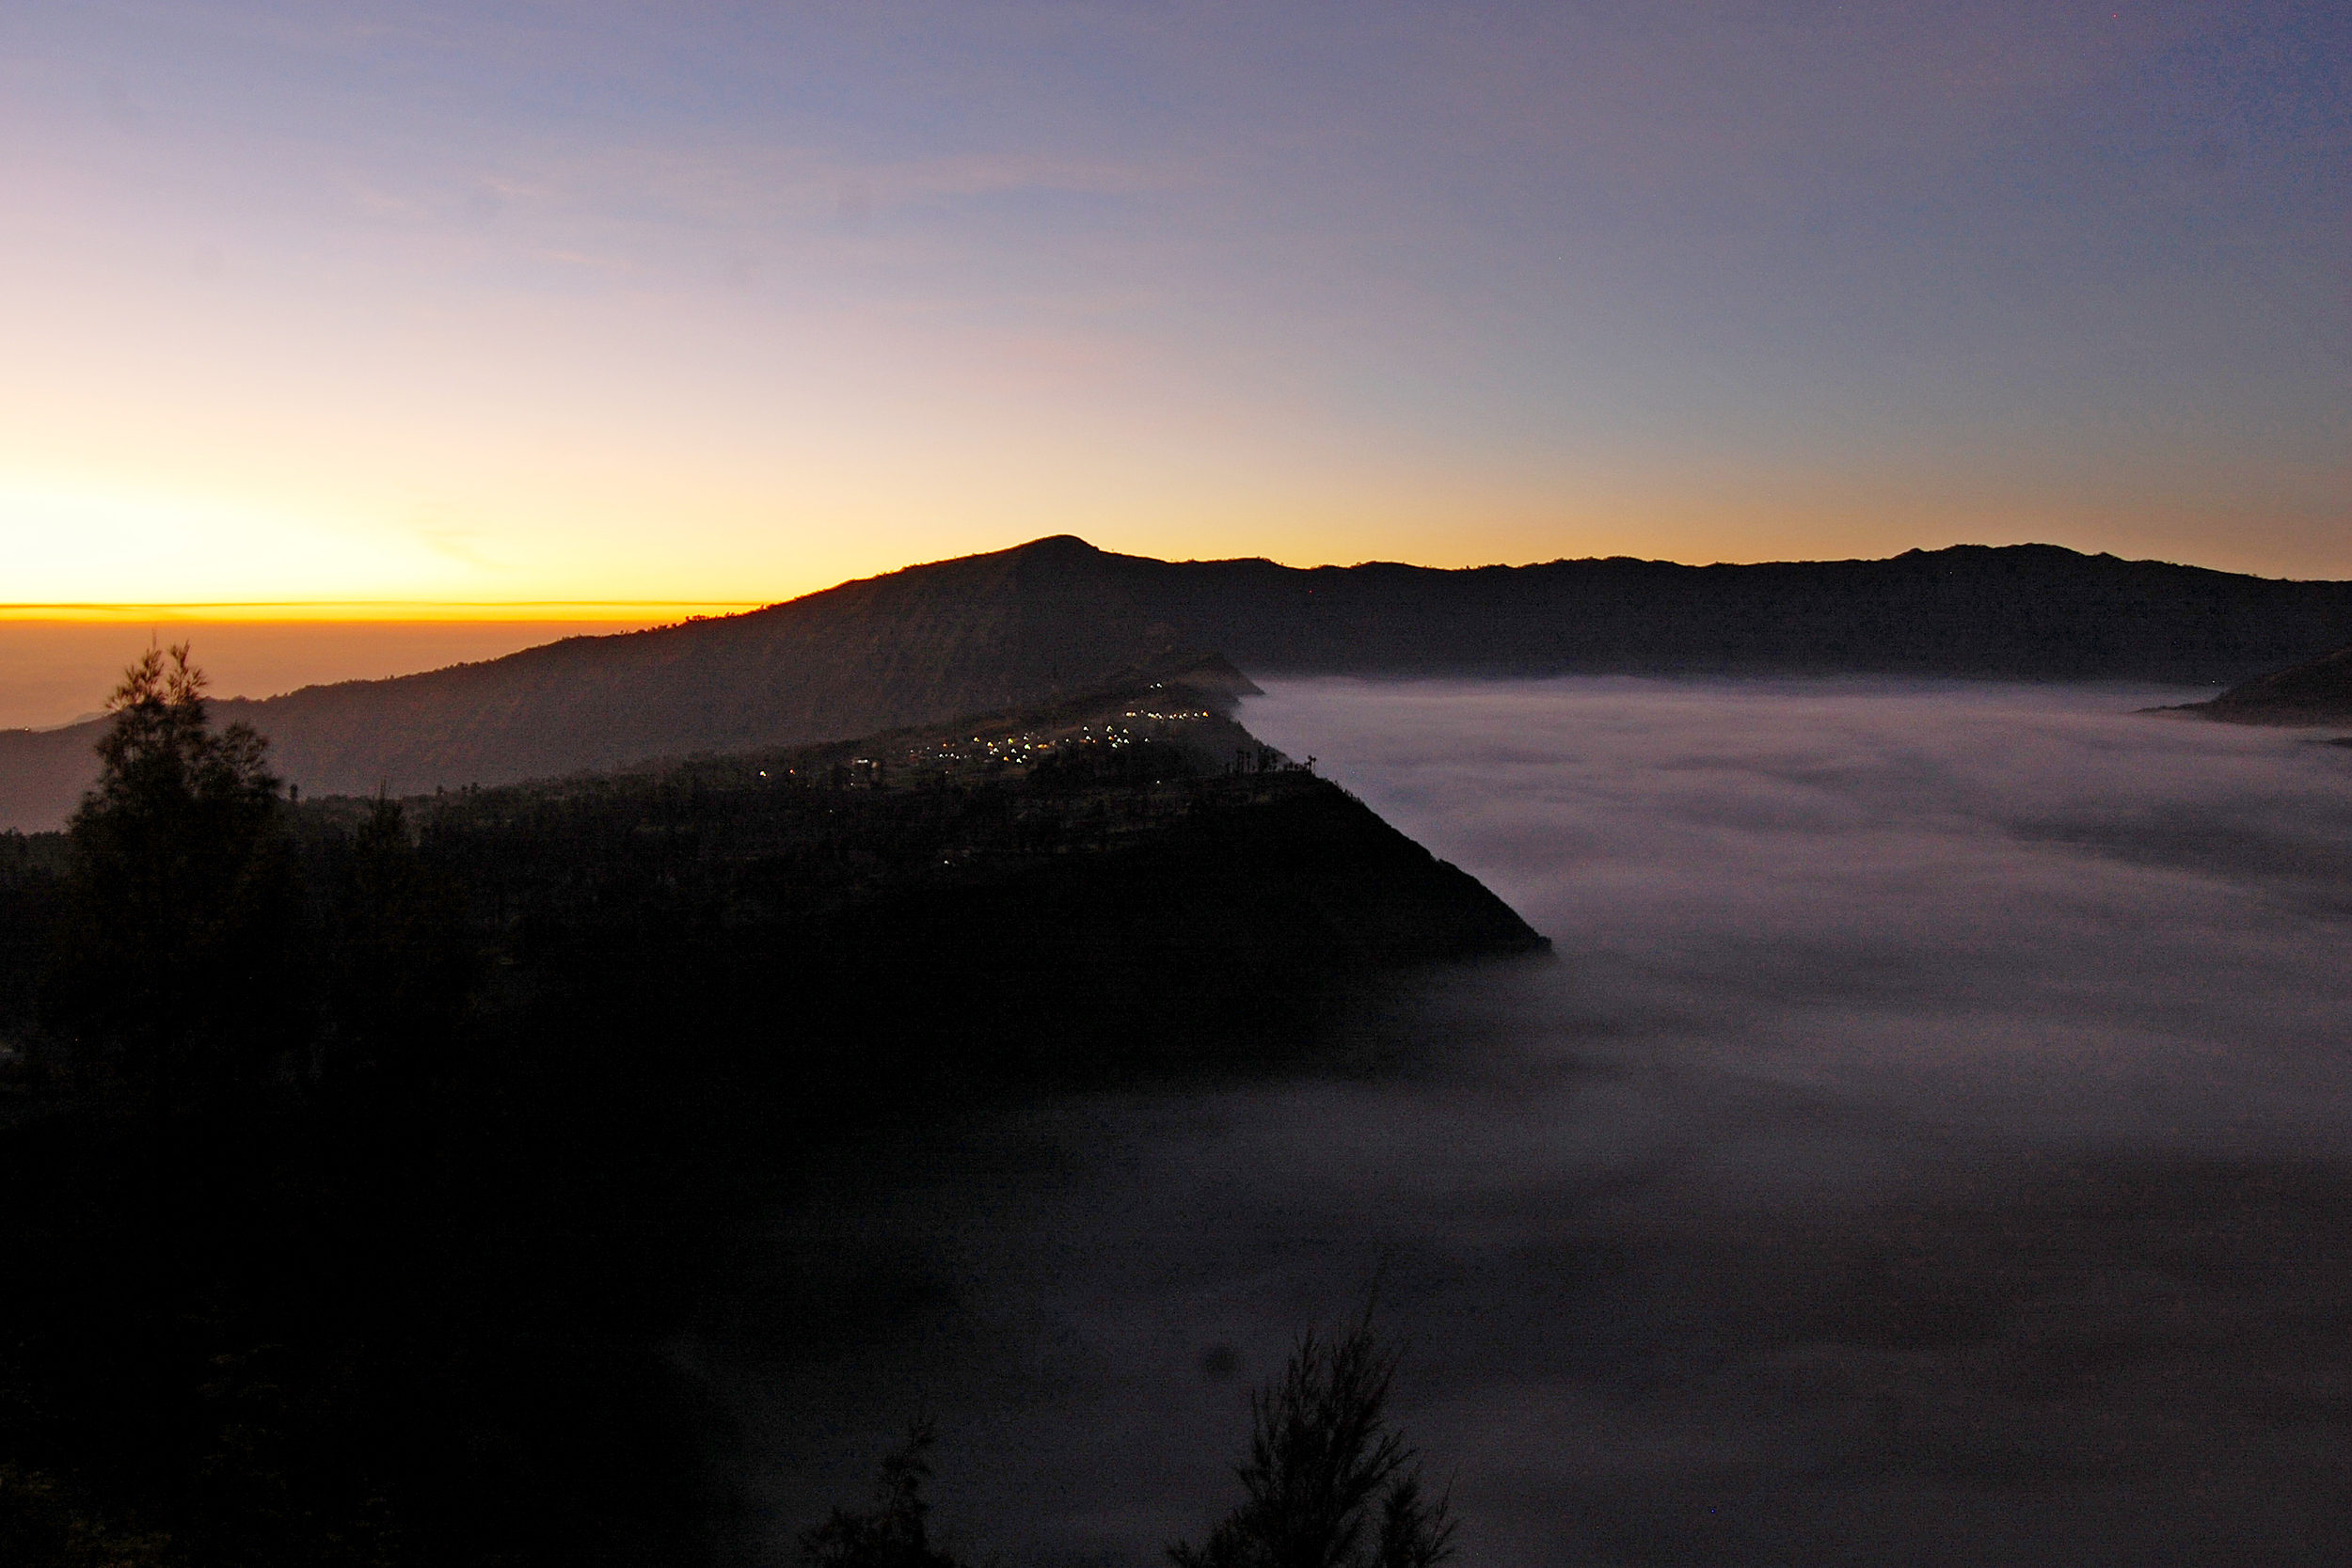 Views from the top of mount bromo at sunrise